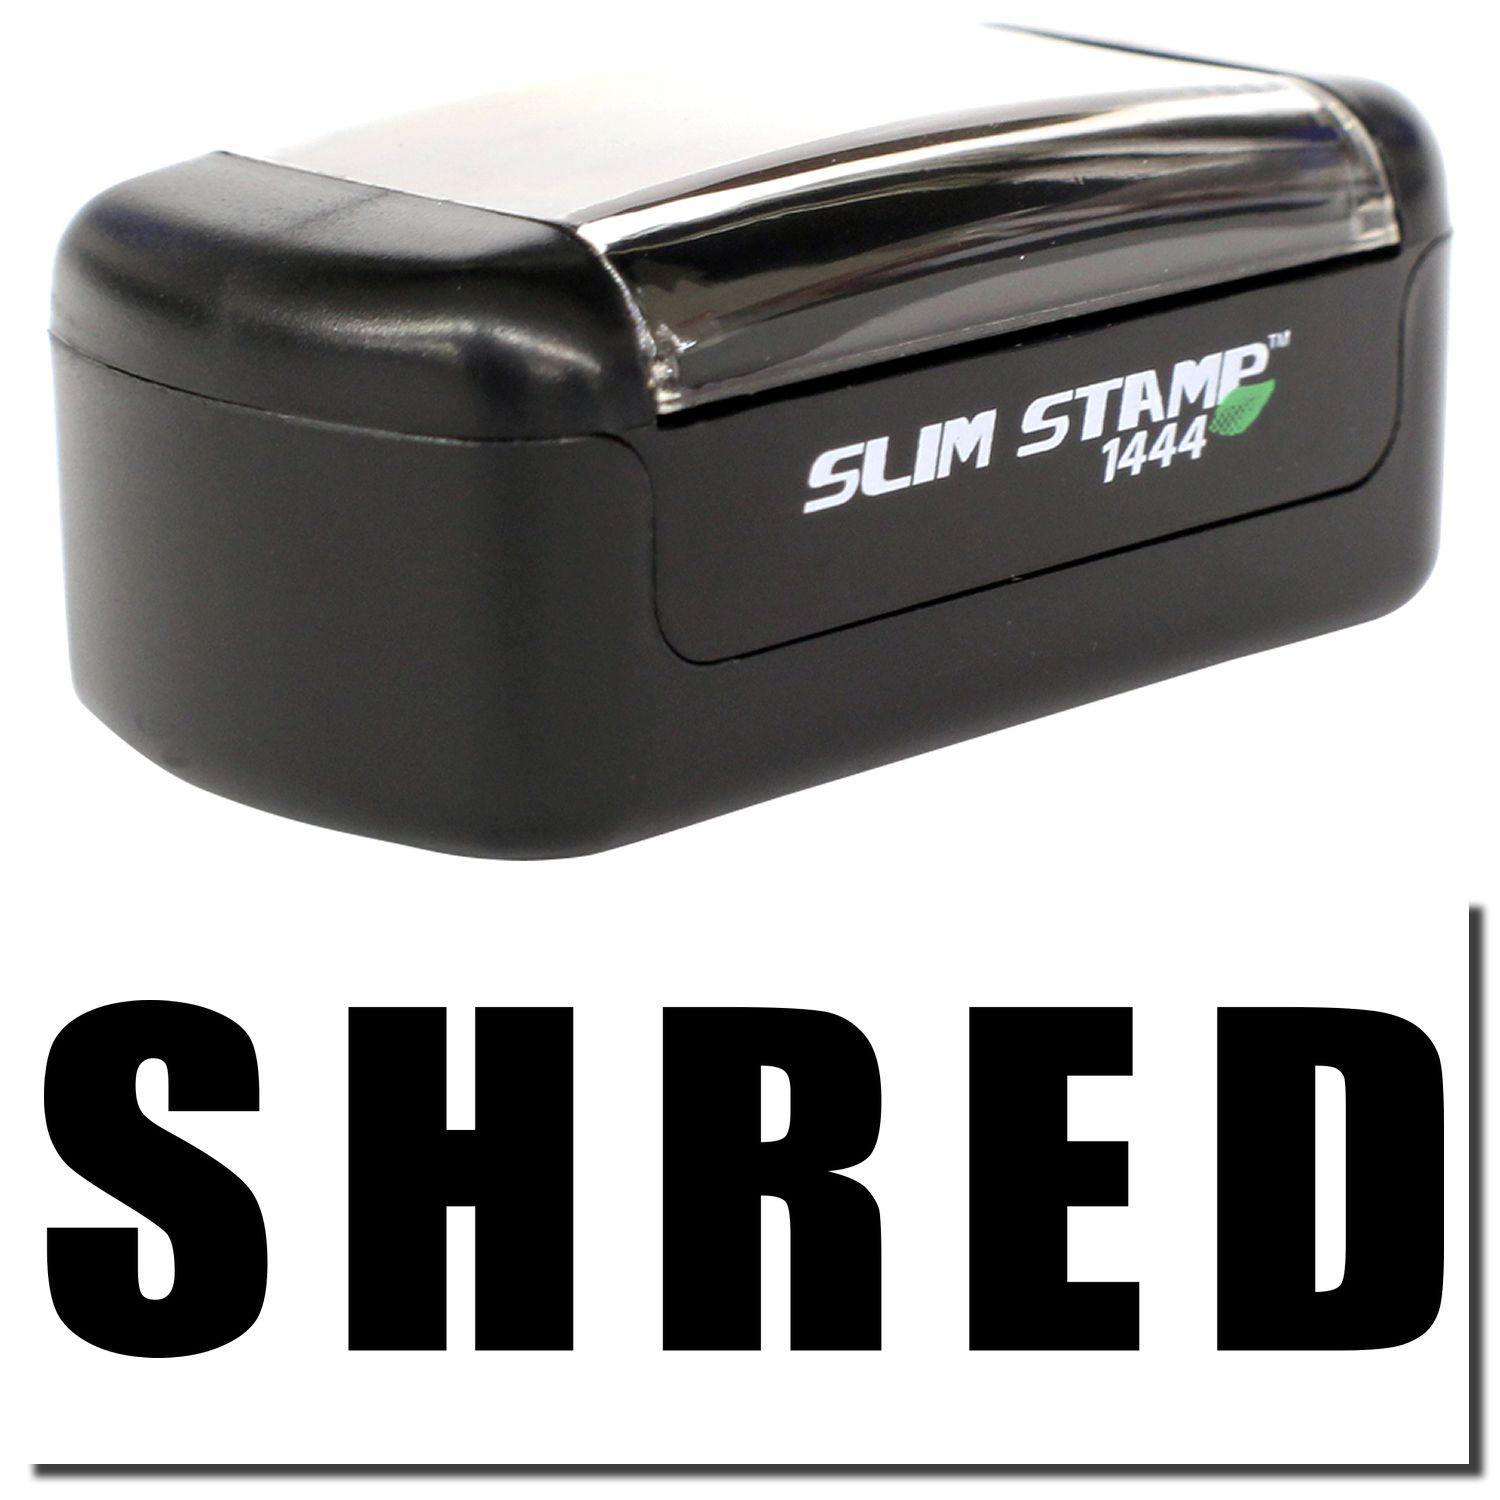 A stock office pre-inked stamp with a stamped image showing how the text "SHRED" in bold font is displayed after stamping.